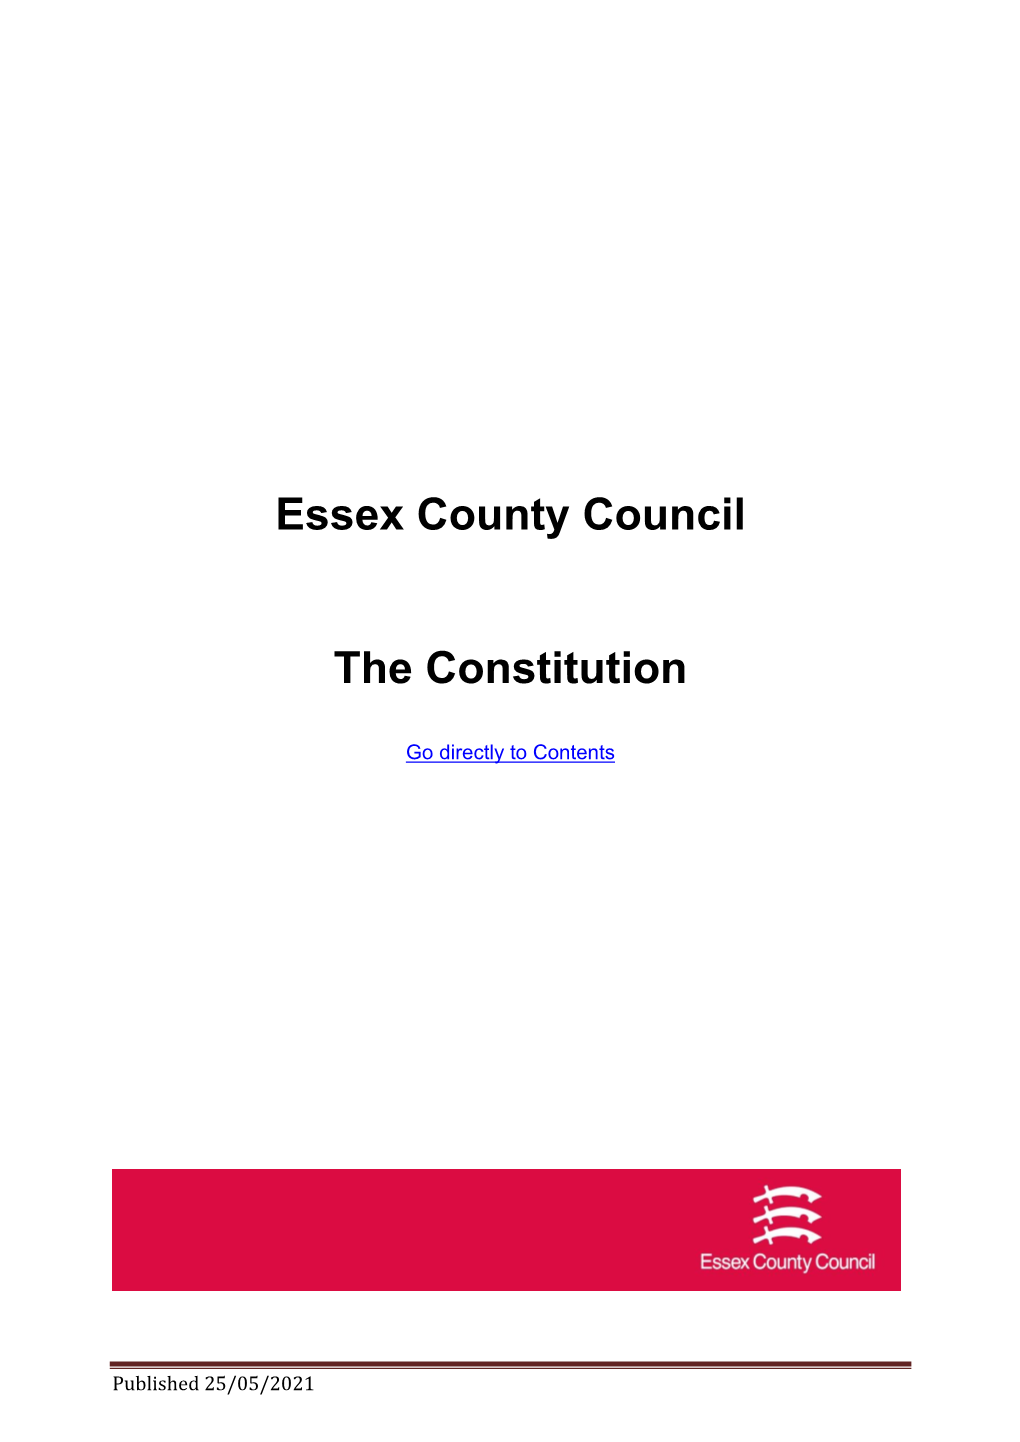 Essex County Council's Constitution